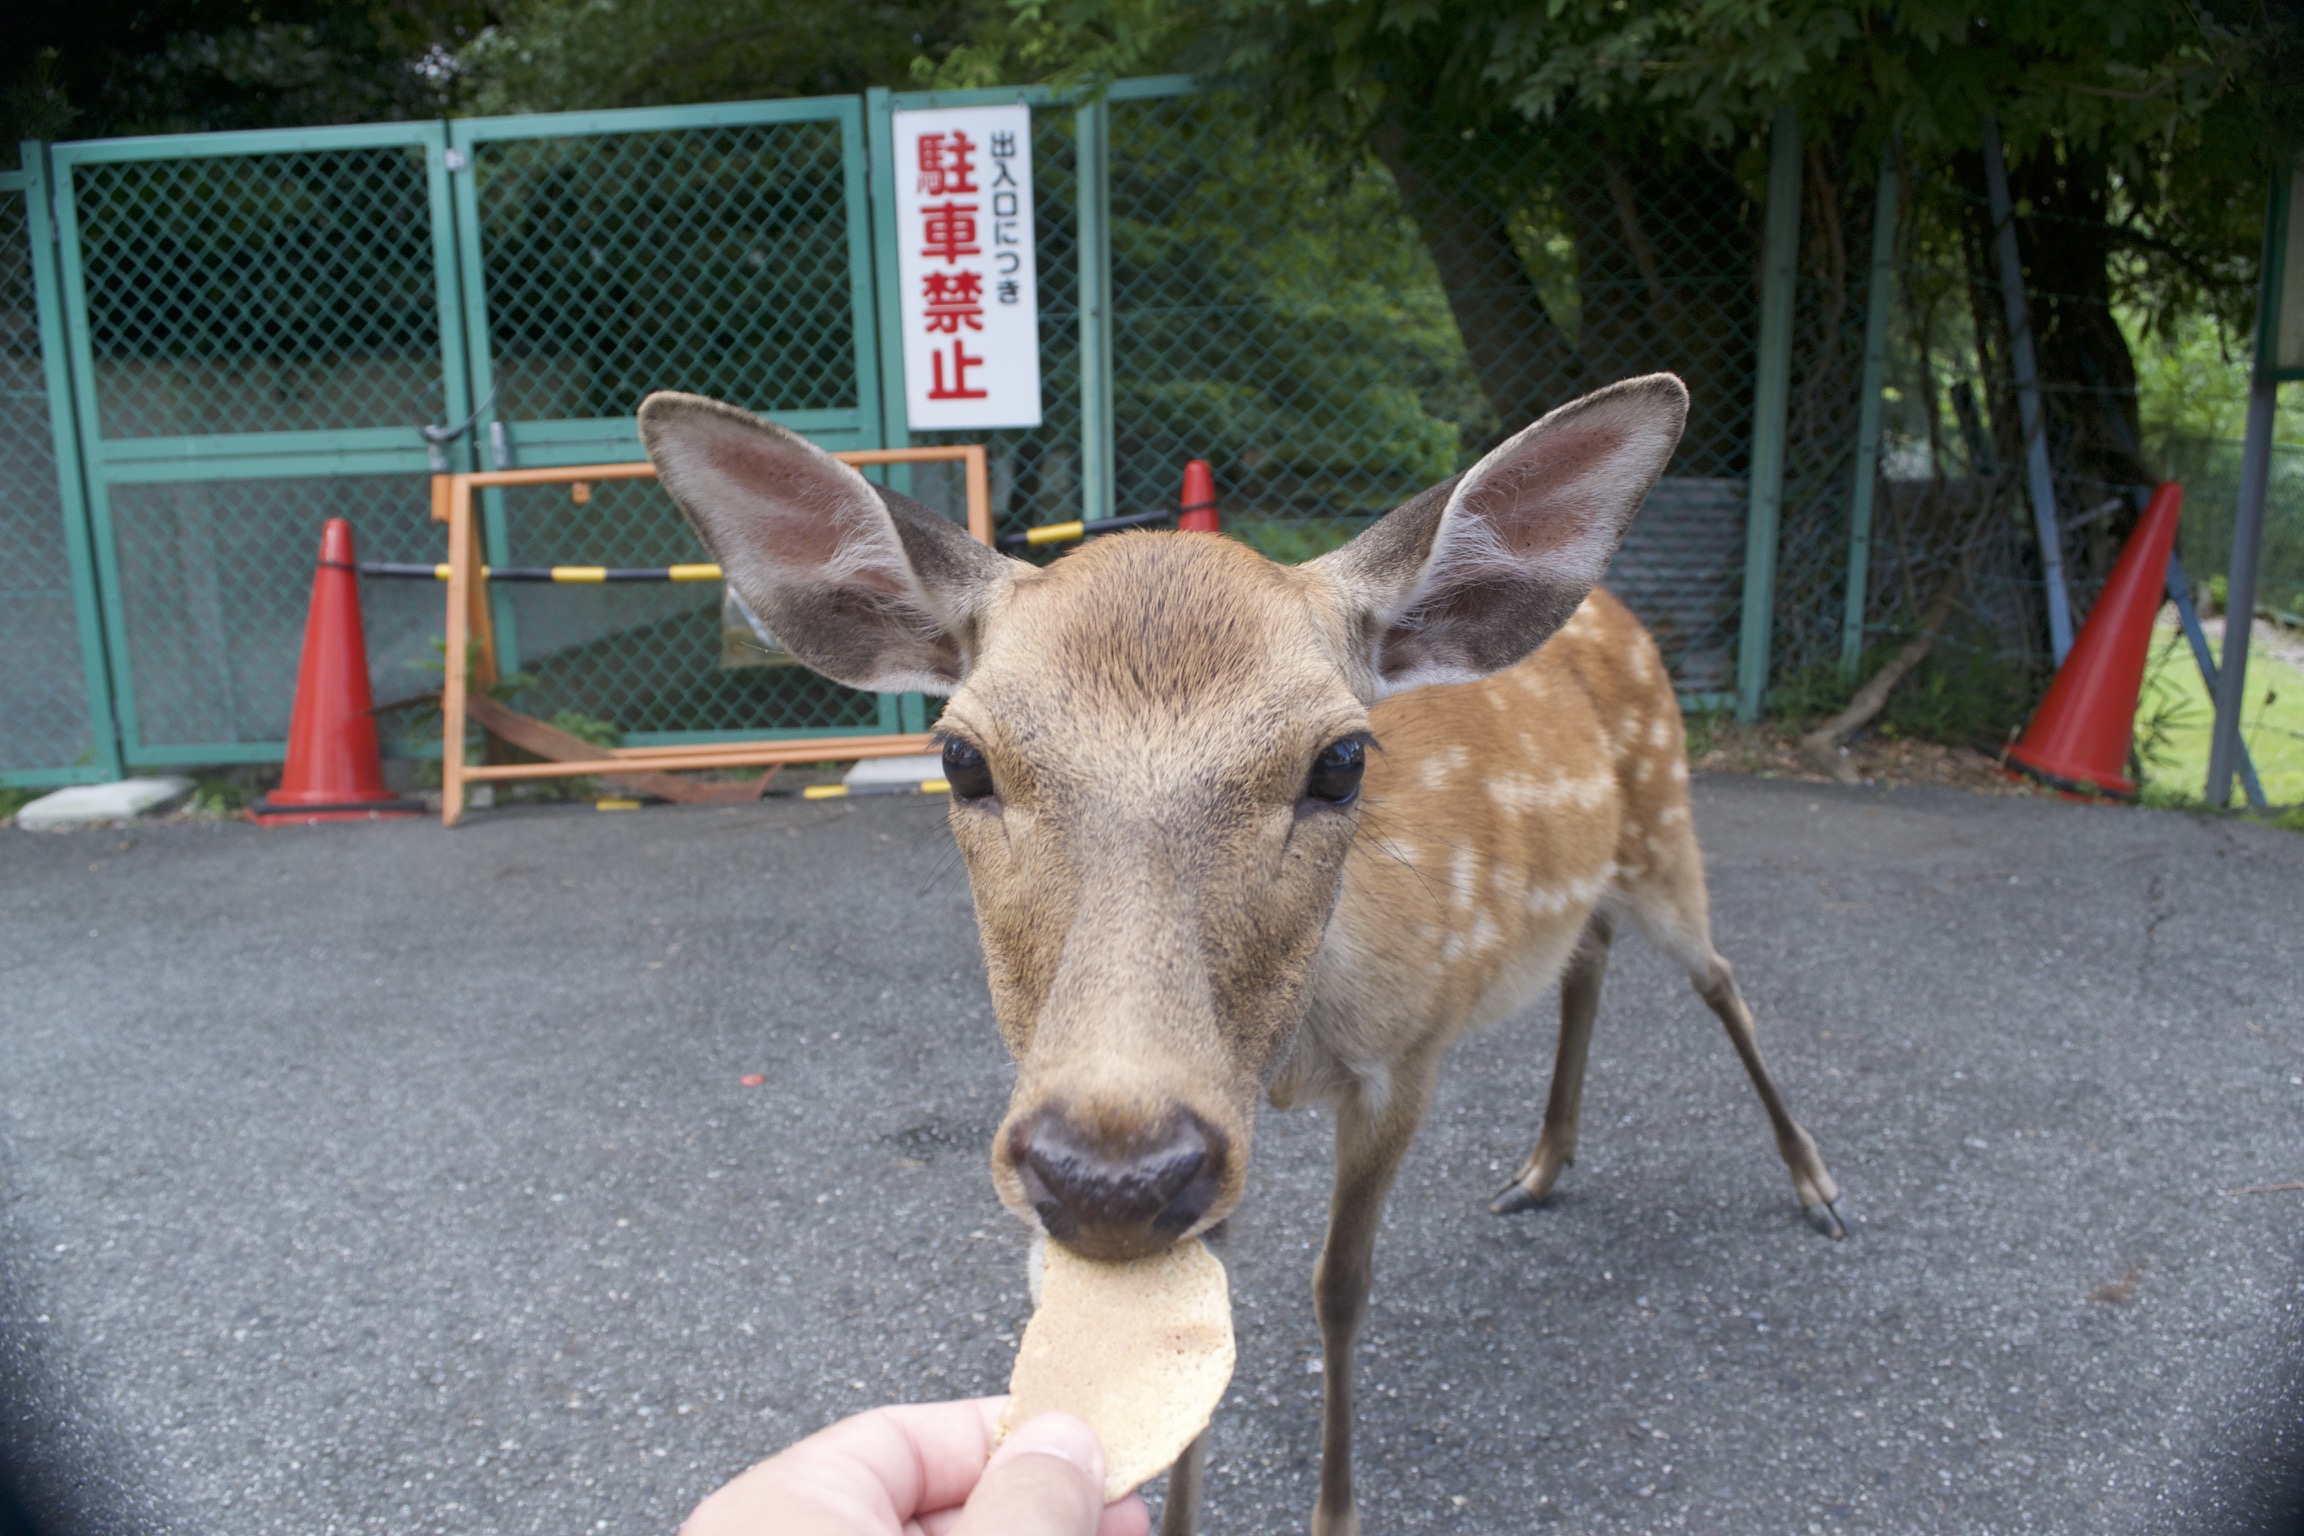 A deer takes a cracker from the photographer's hand.